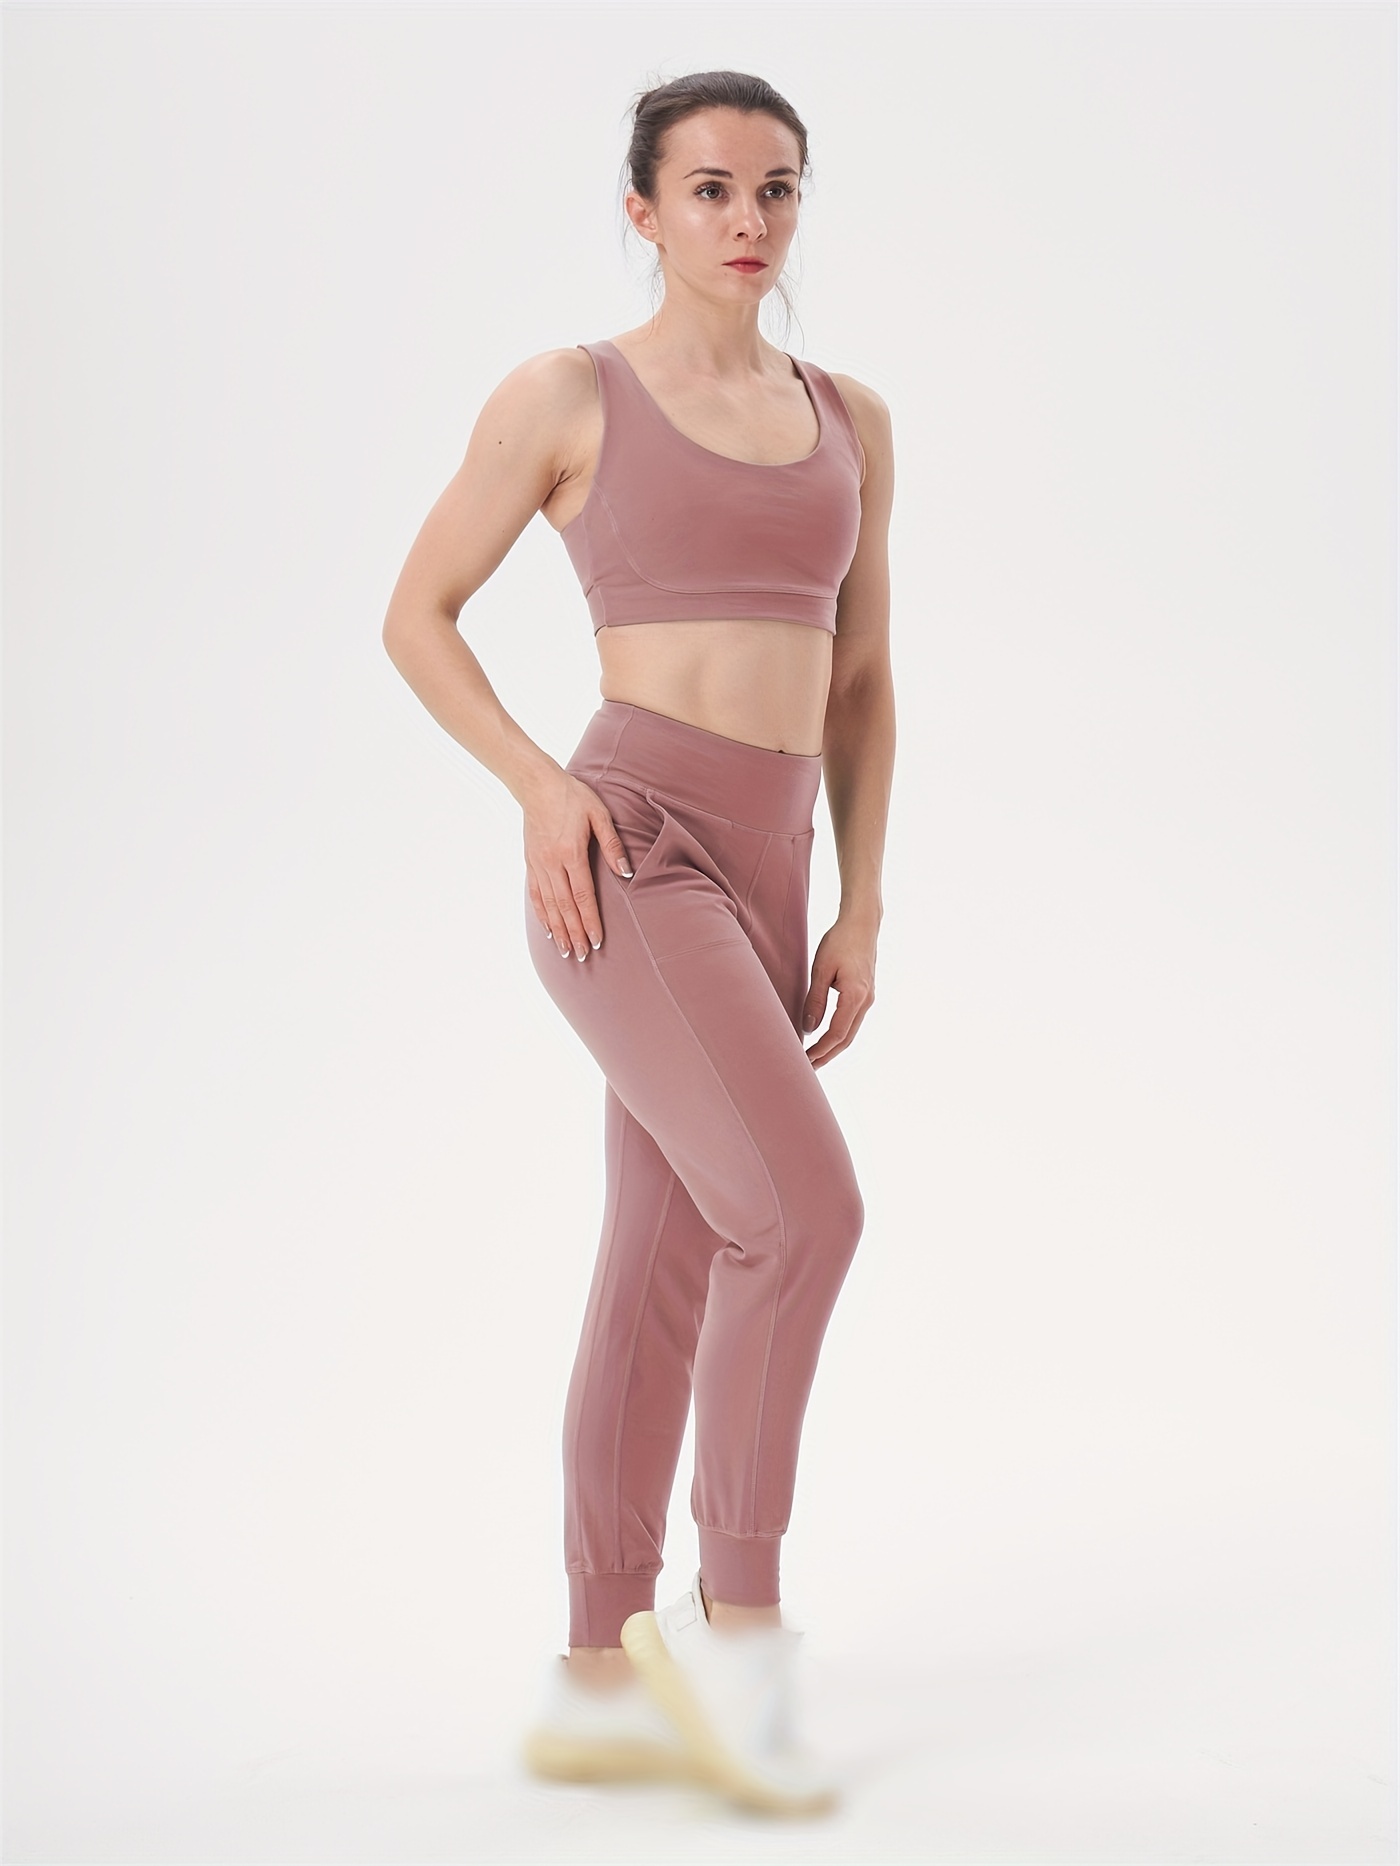 High Waist Yoga Pants For Women, Solid Color Medium Stretch